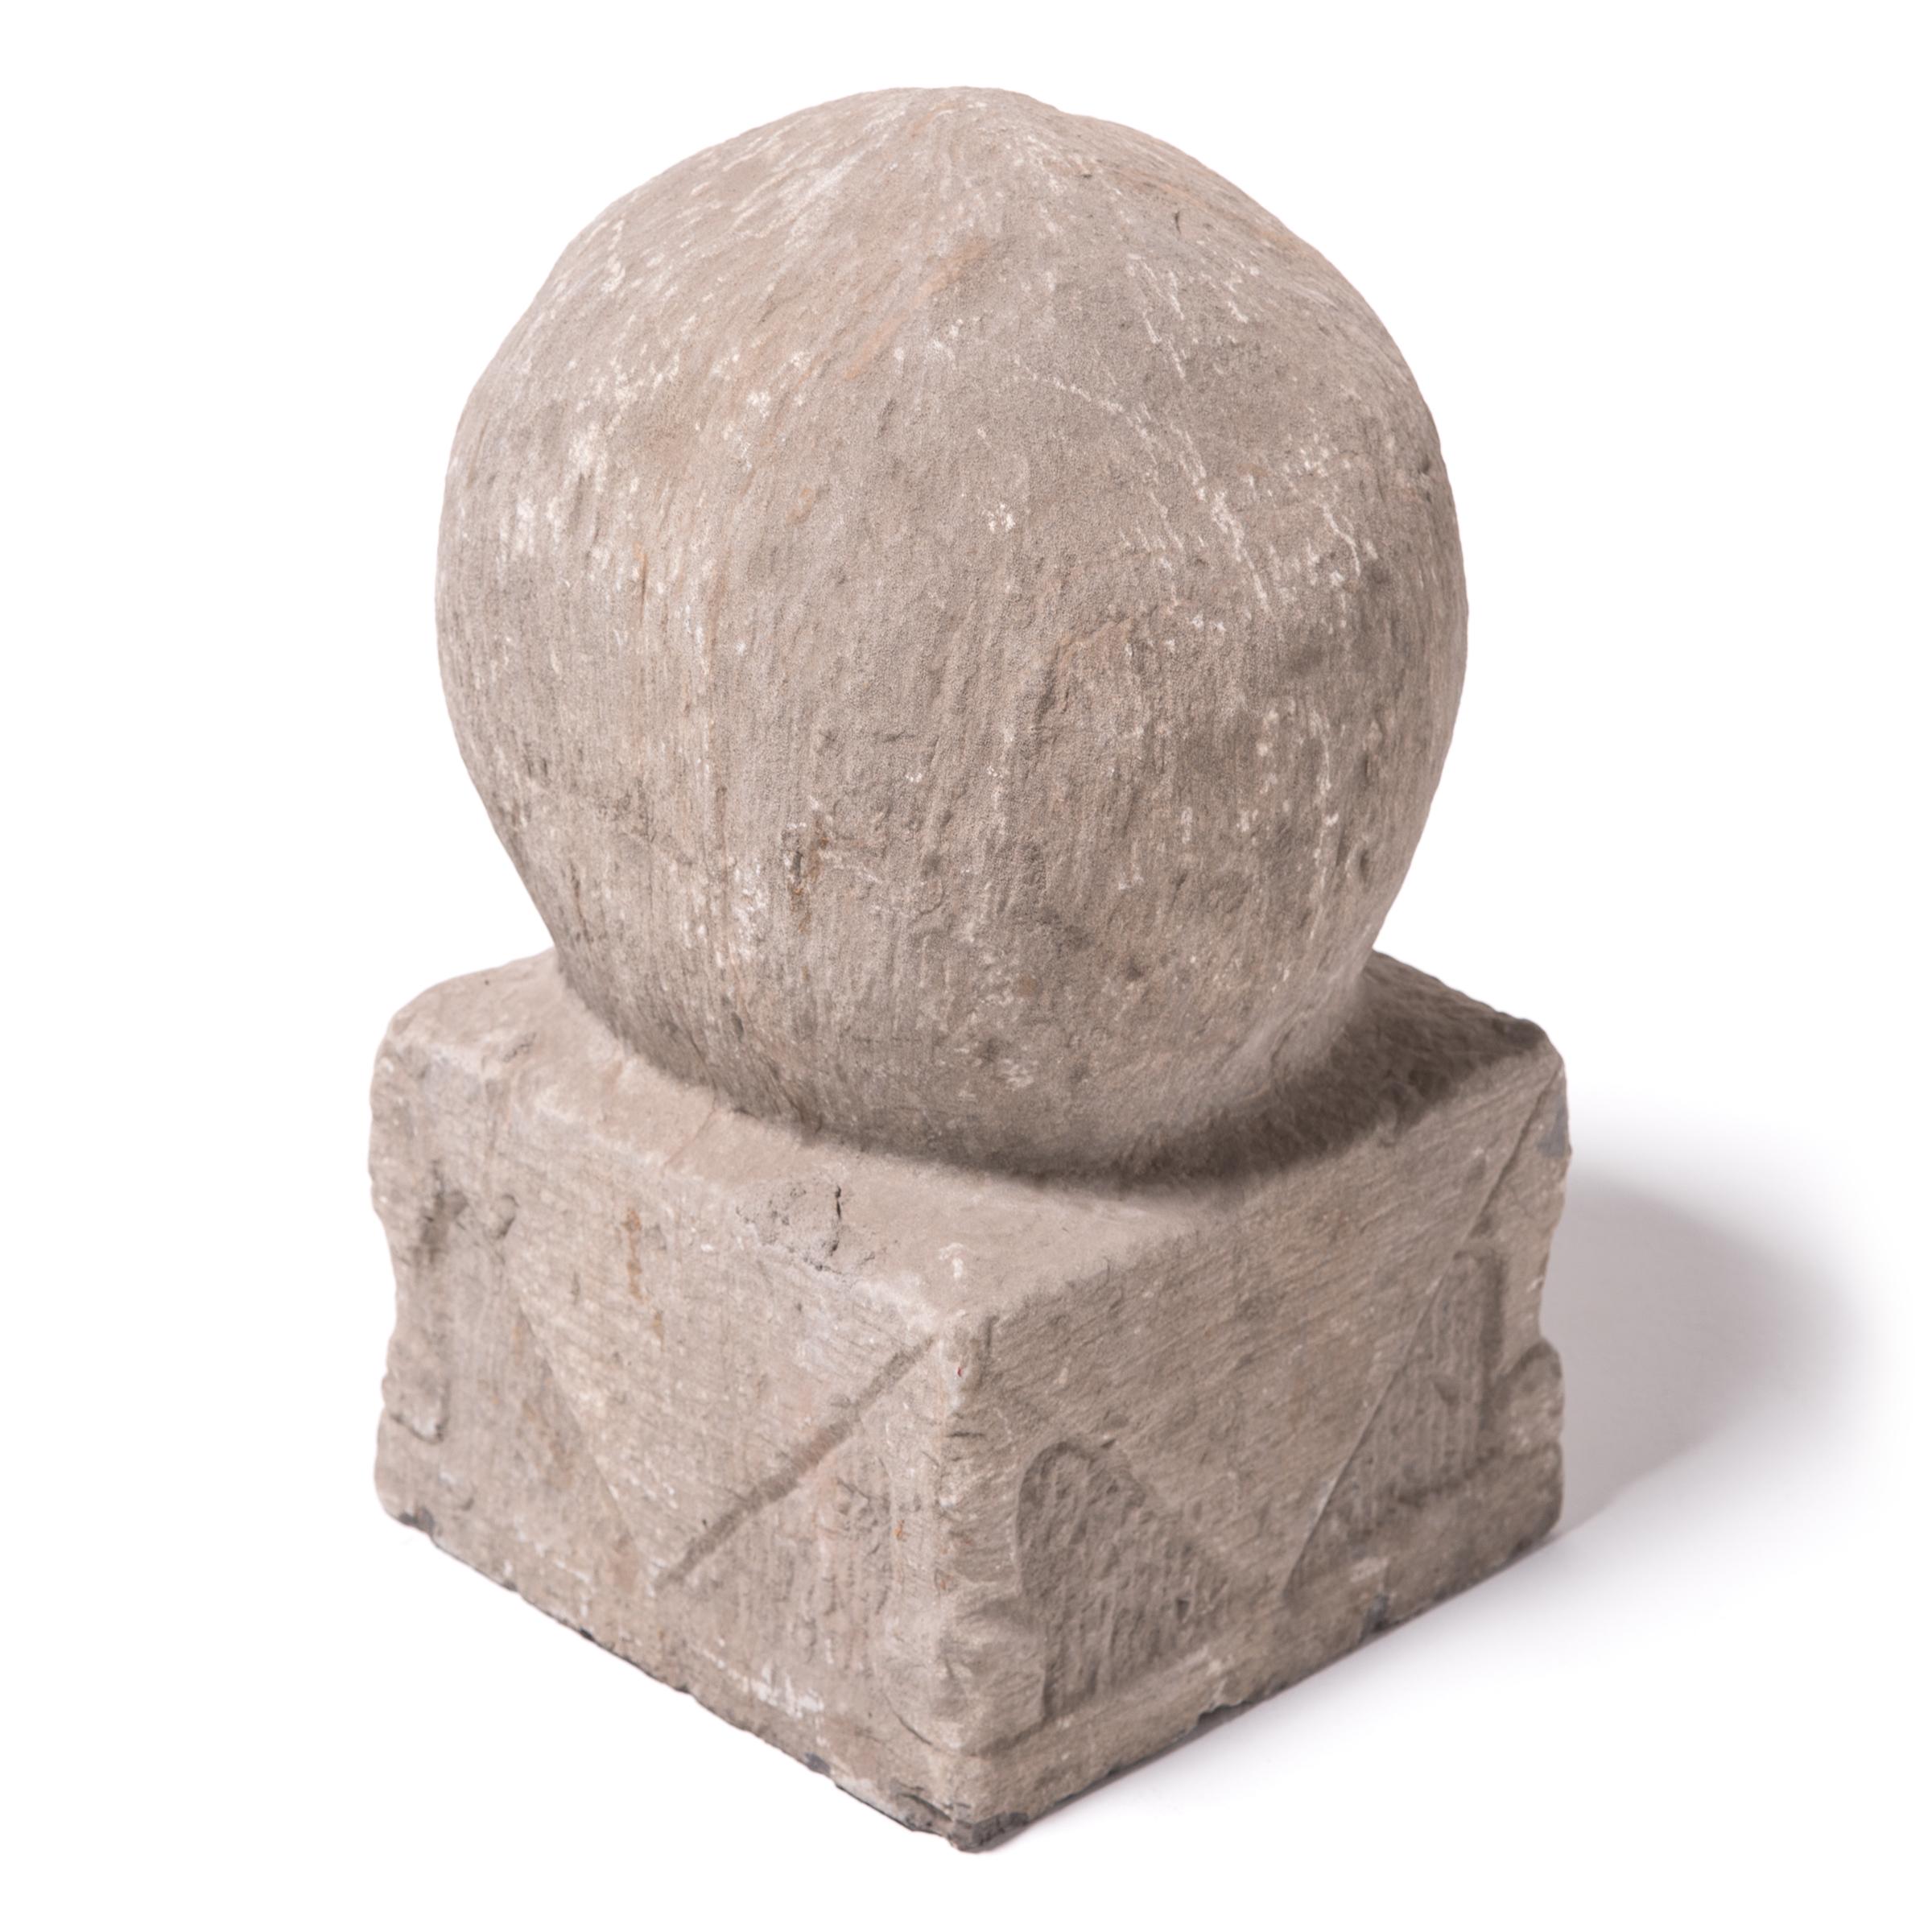 This carved limestone charm promises longevity in the form of the immortal peach. According to Chinese mythology, the Jade Emperor’s palace was surrounded by peach trees that provided ripe fruit every three thousand years. A single bite of this